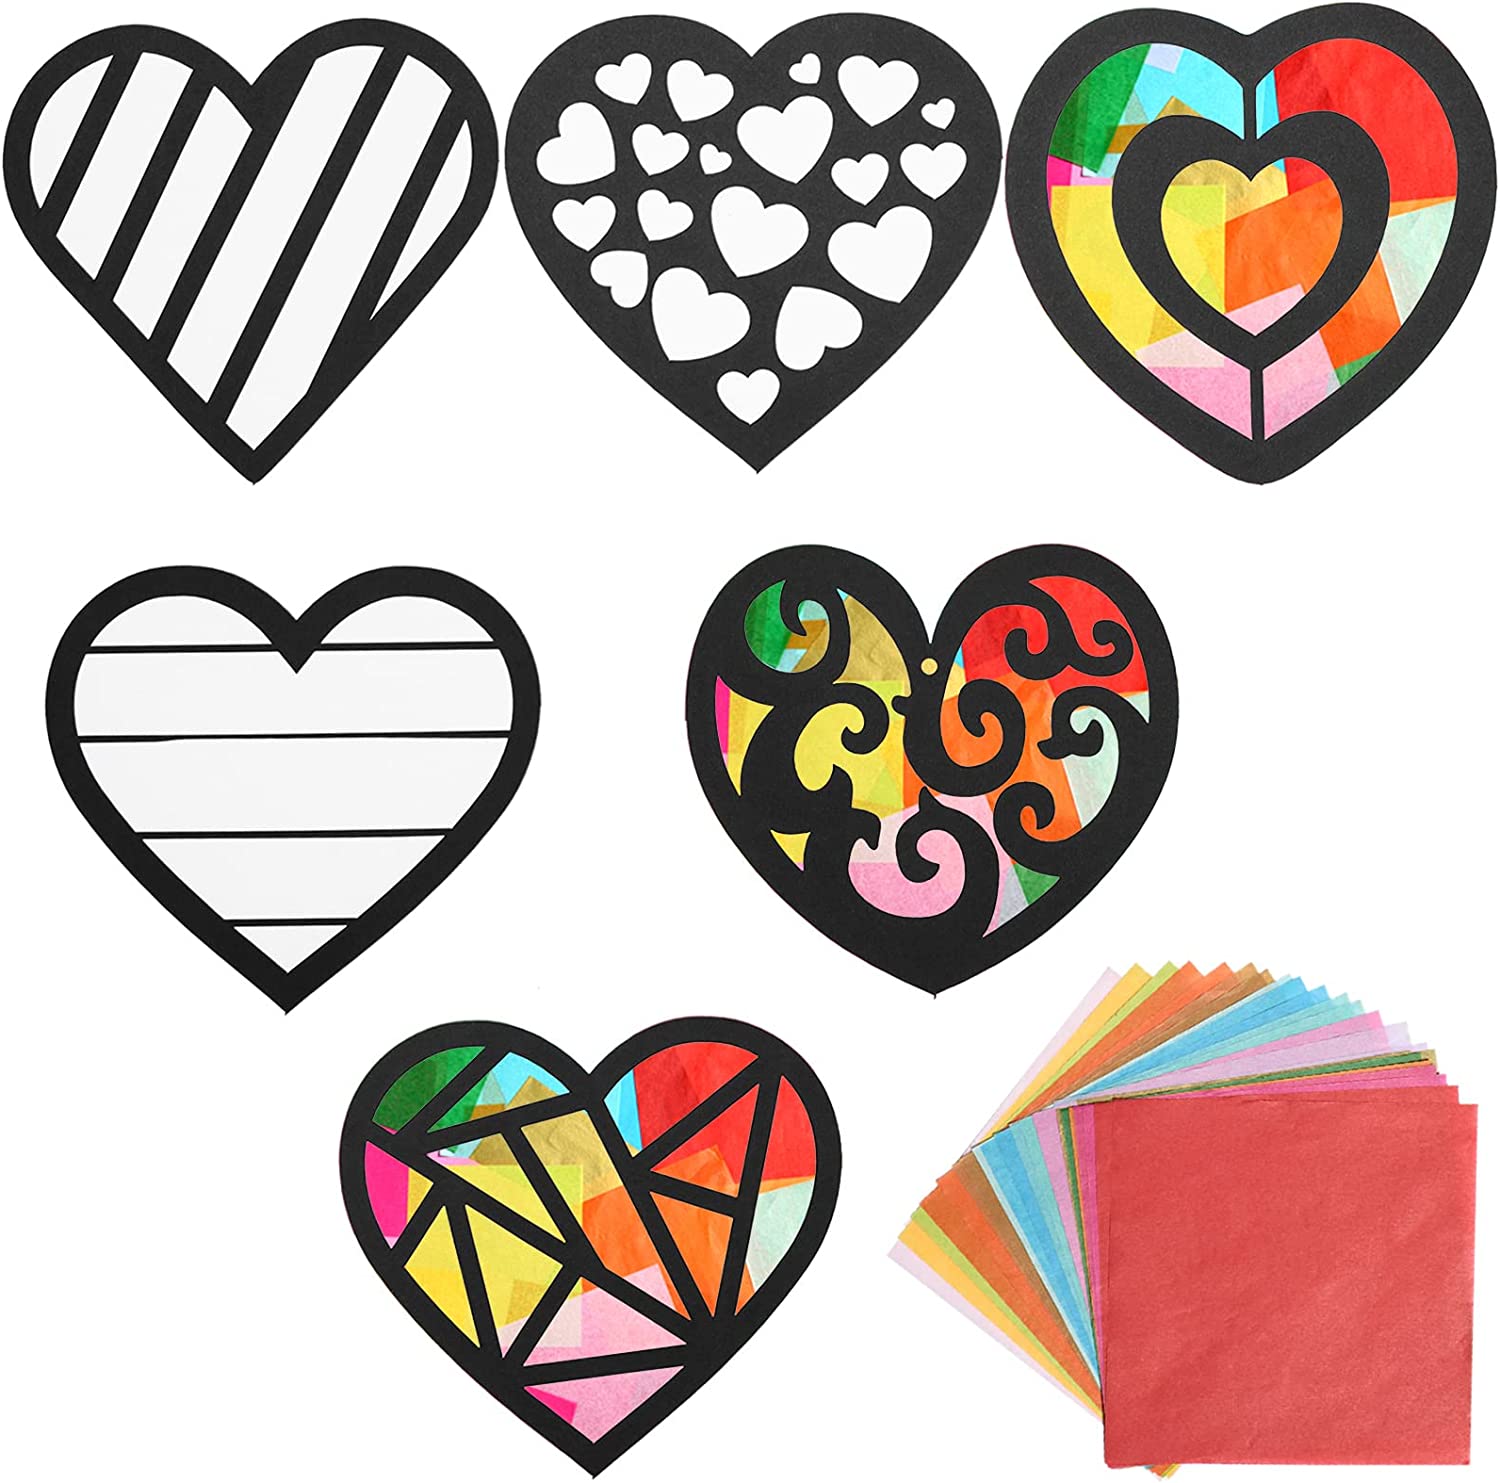 Heart shapes and colored tissue paper